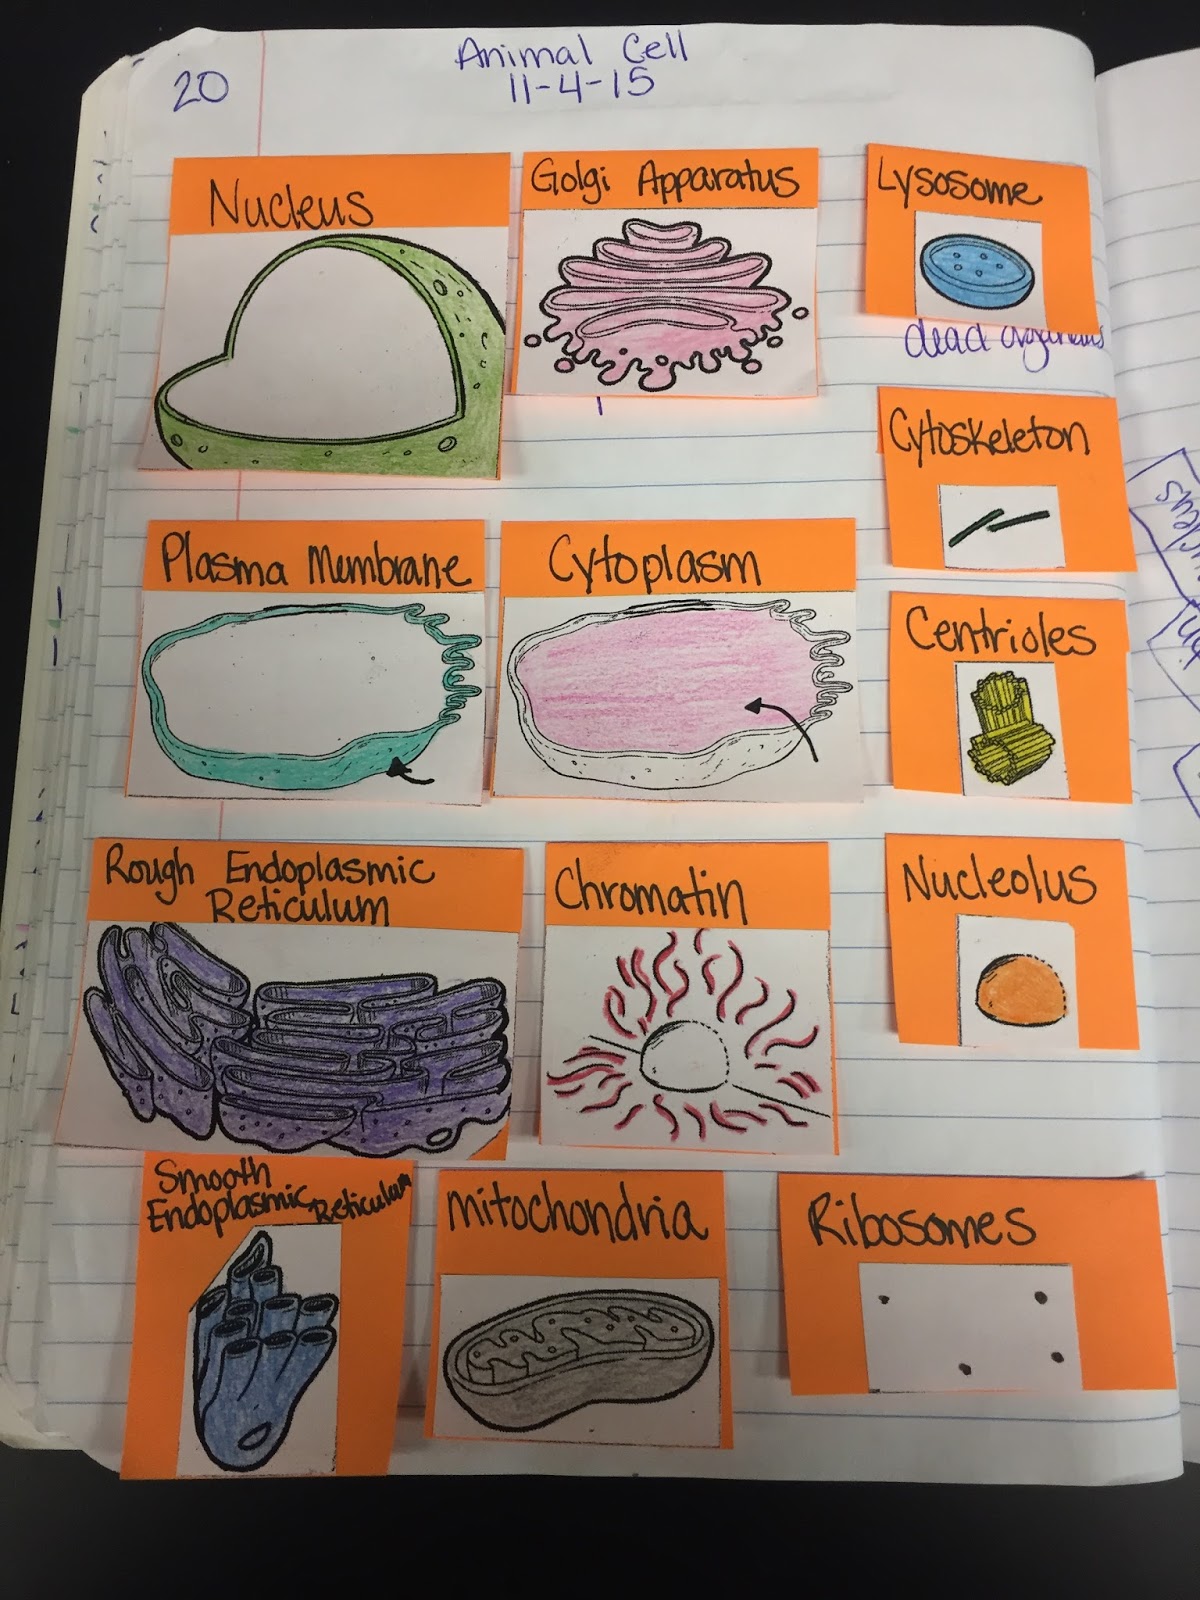 Teaching in Special Education: Animal Cells